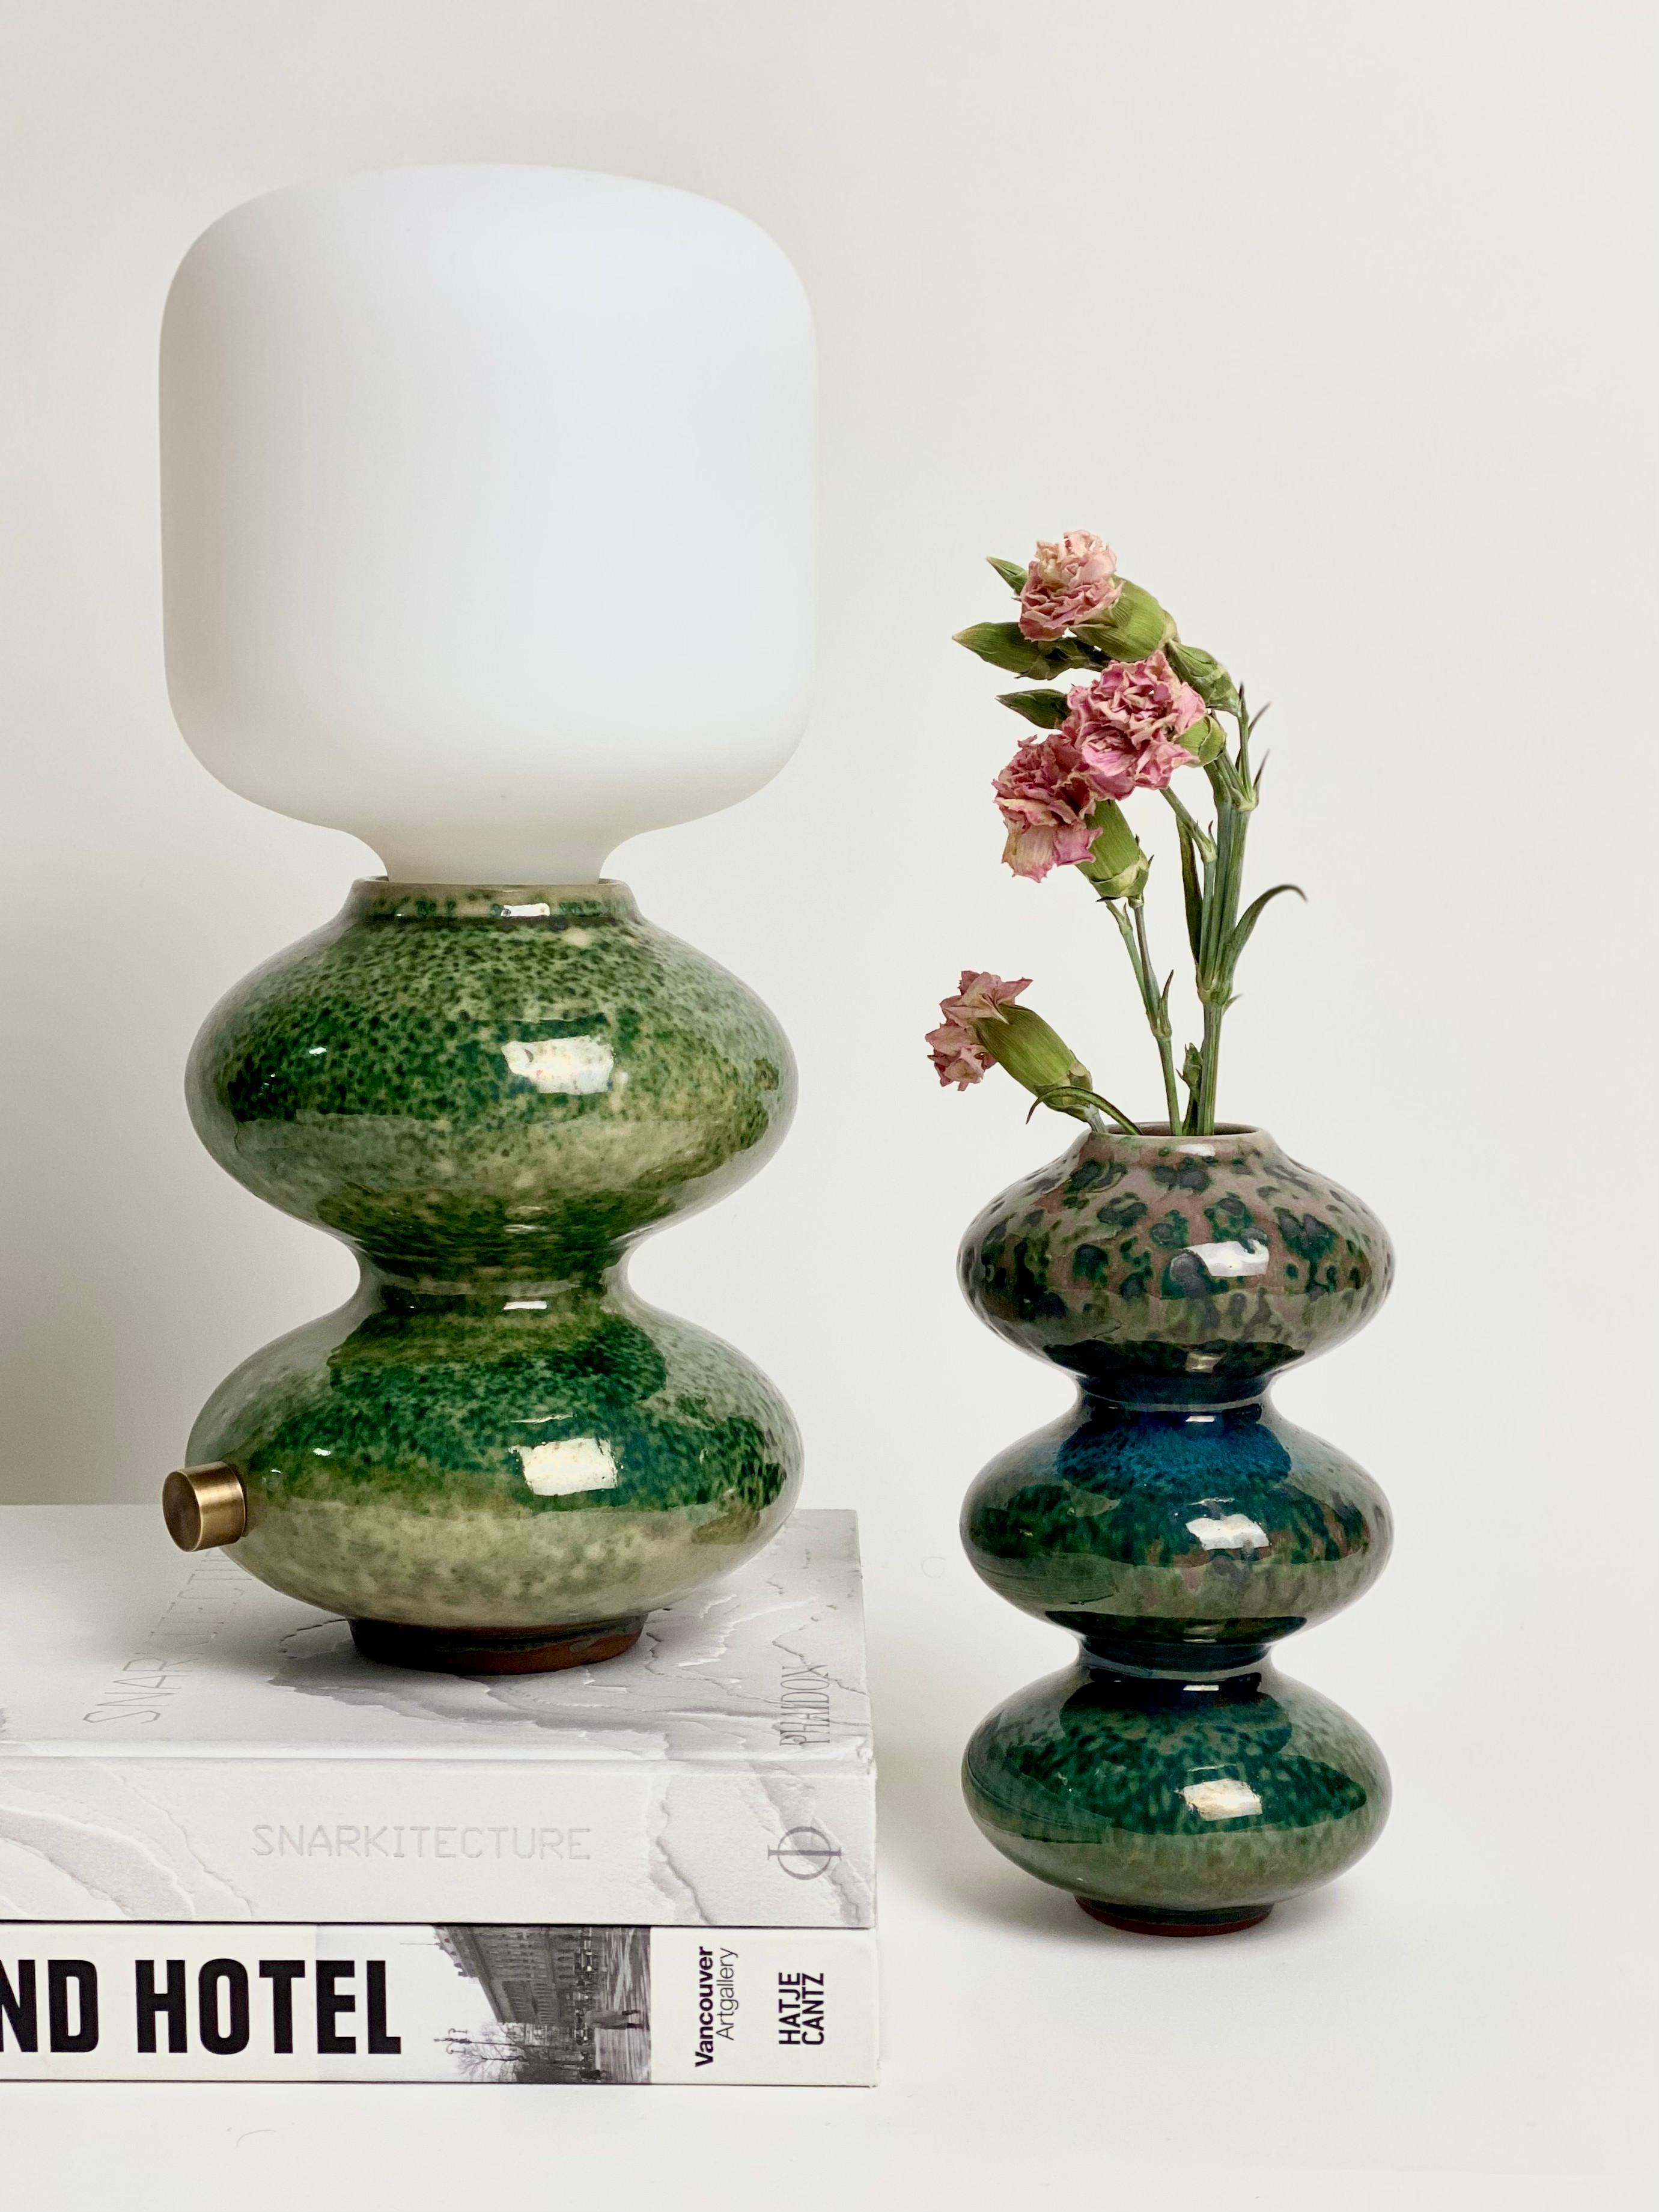 Hand-Crafted Organic Modern Ceramic Wave Form Table Lamp in Green by Forma Rosa Studio -Stock